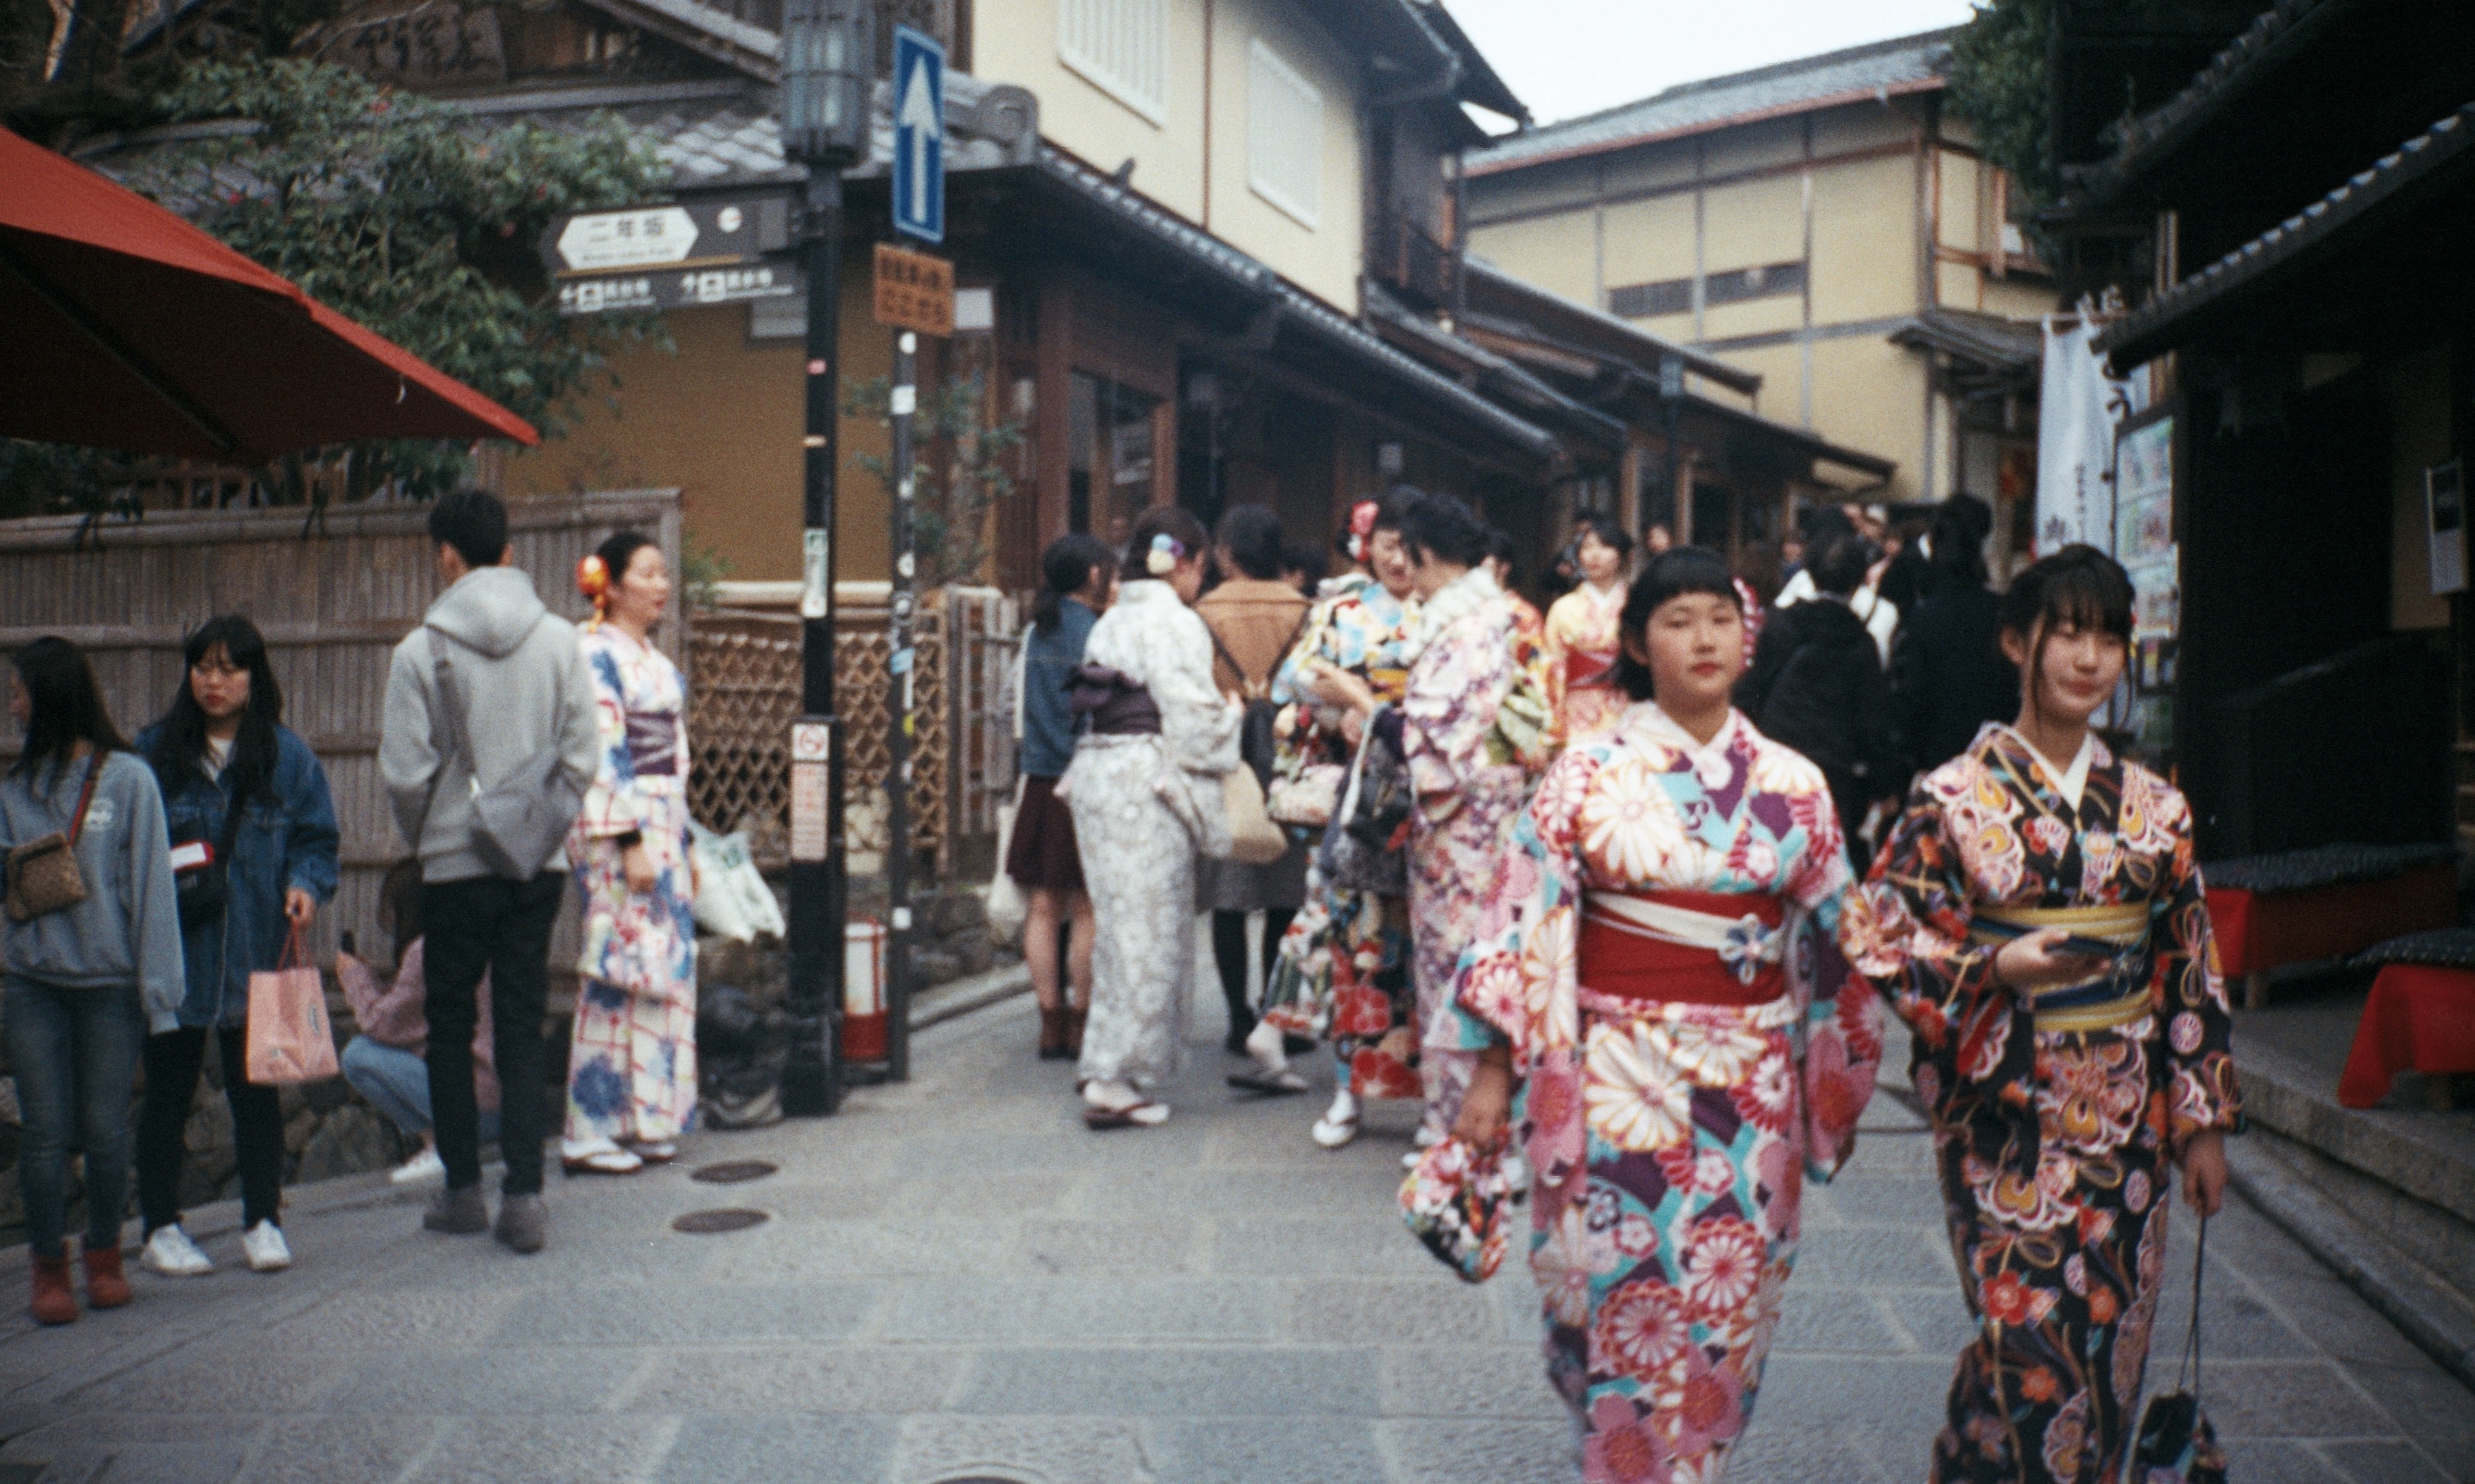 People of Kyoto